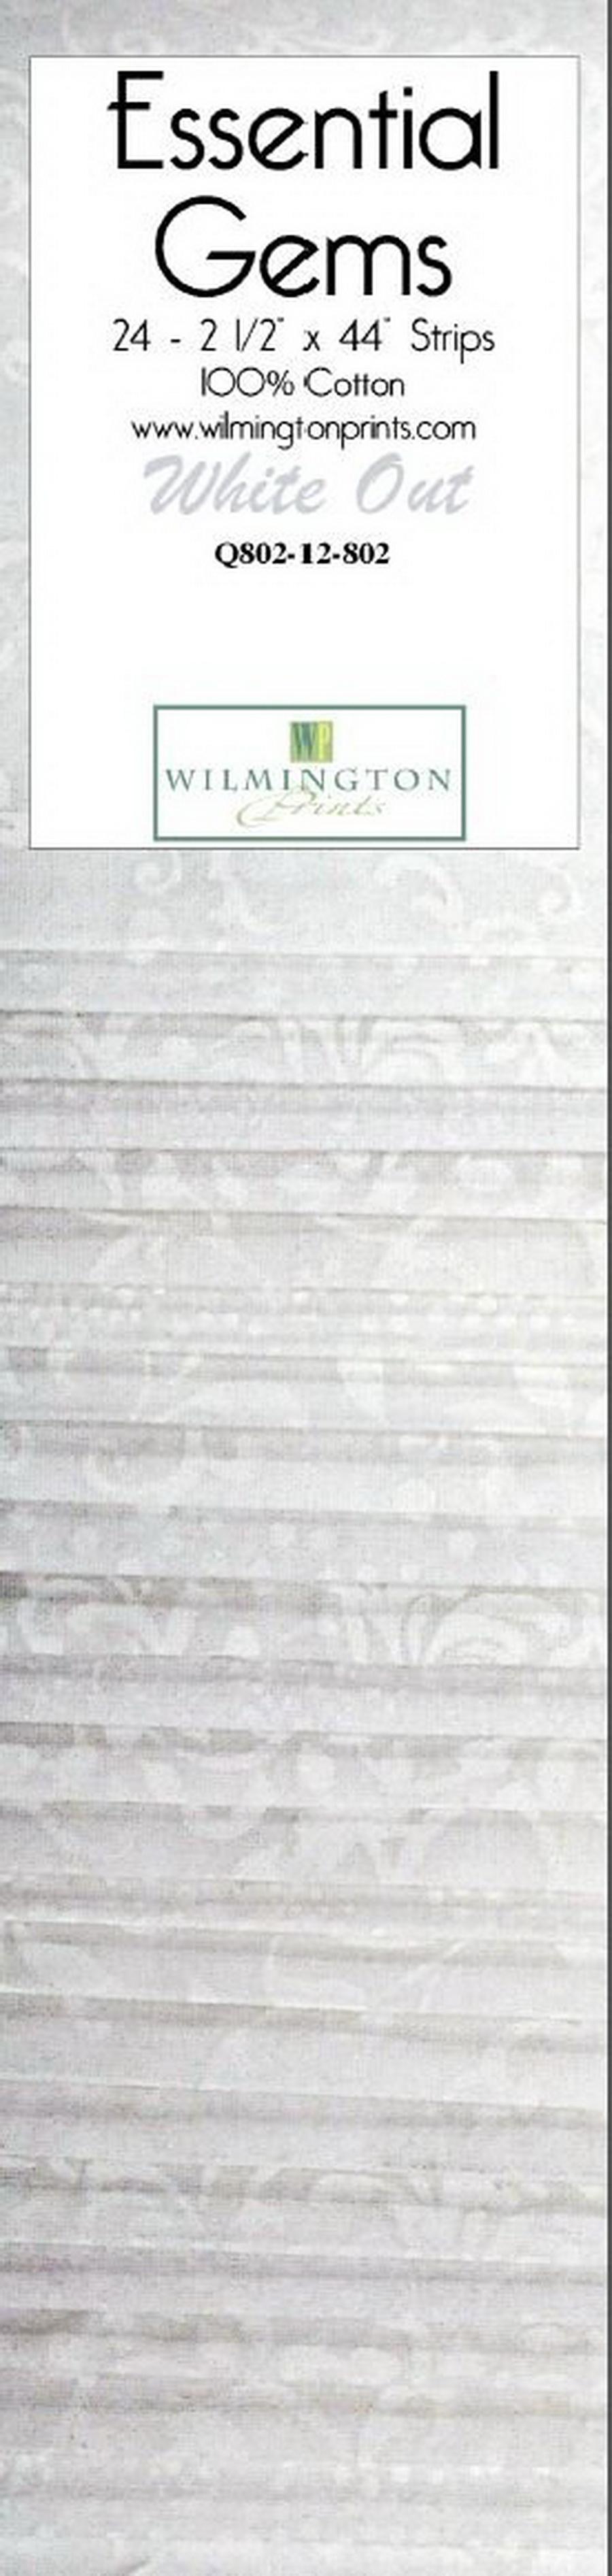 Wilmington Prints White Out 24 Pack - 2.5 inch x 44 inch Strips